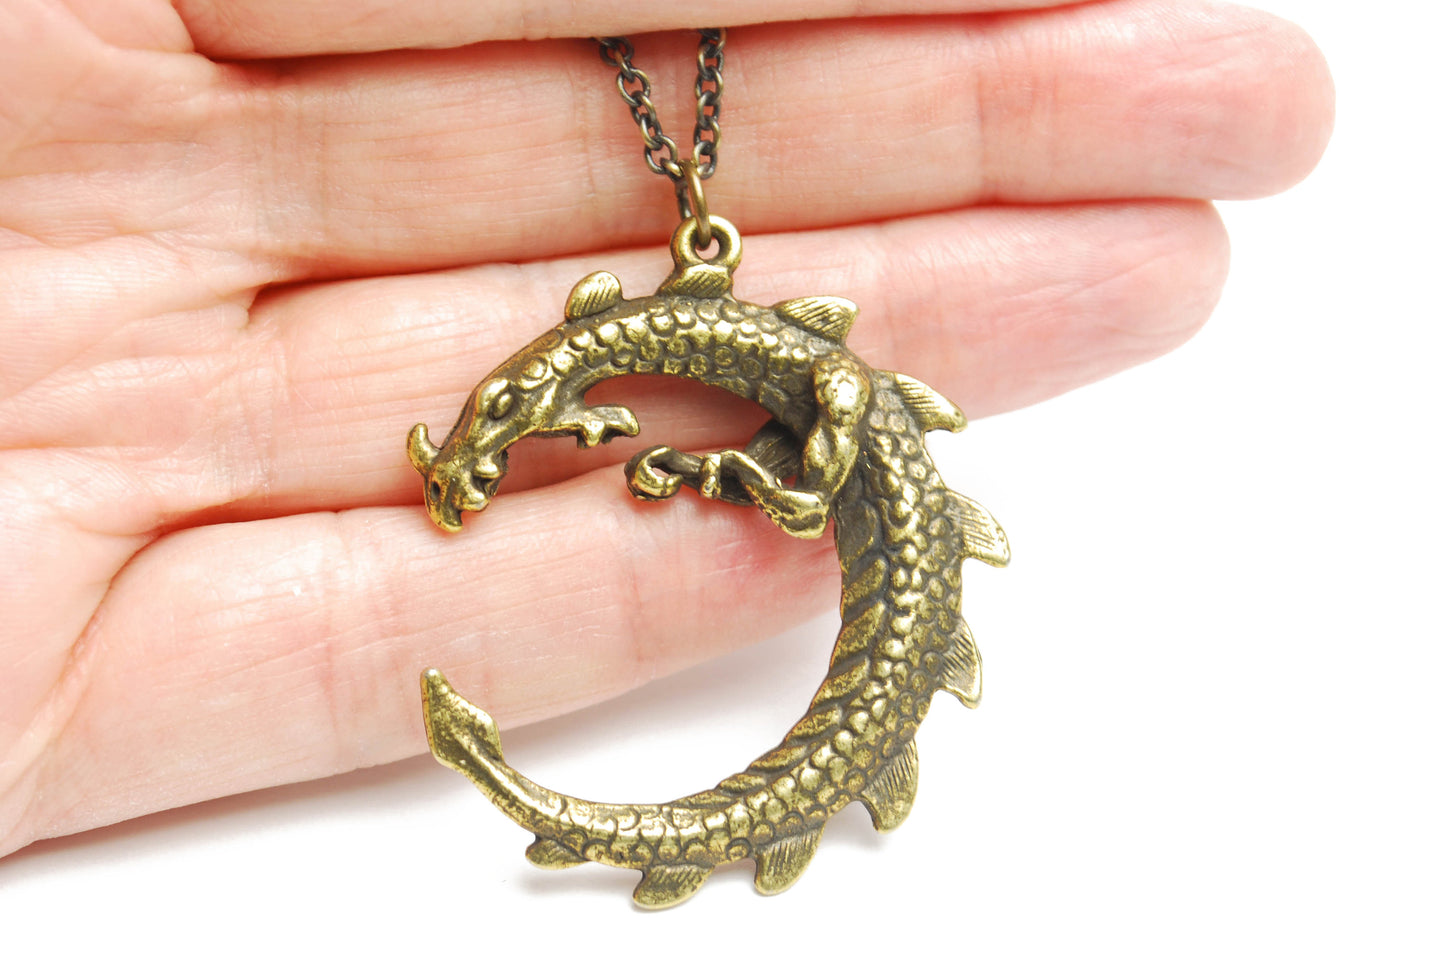 Large Serpent Dragon Necklace in Antique Brass